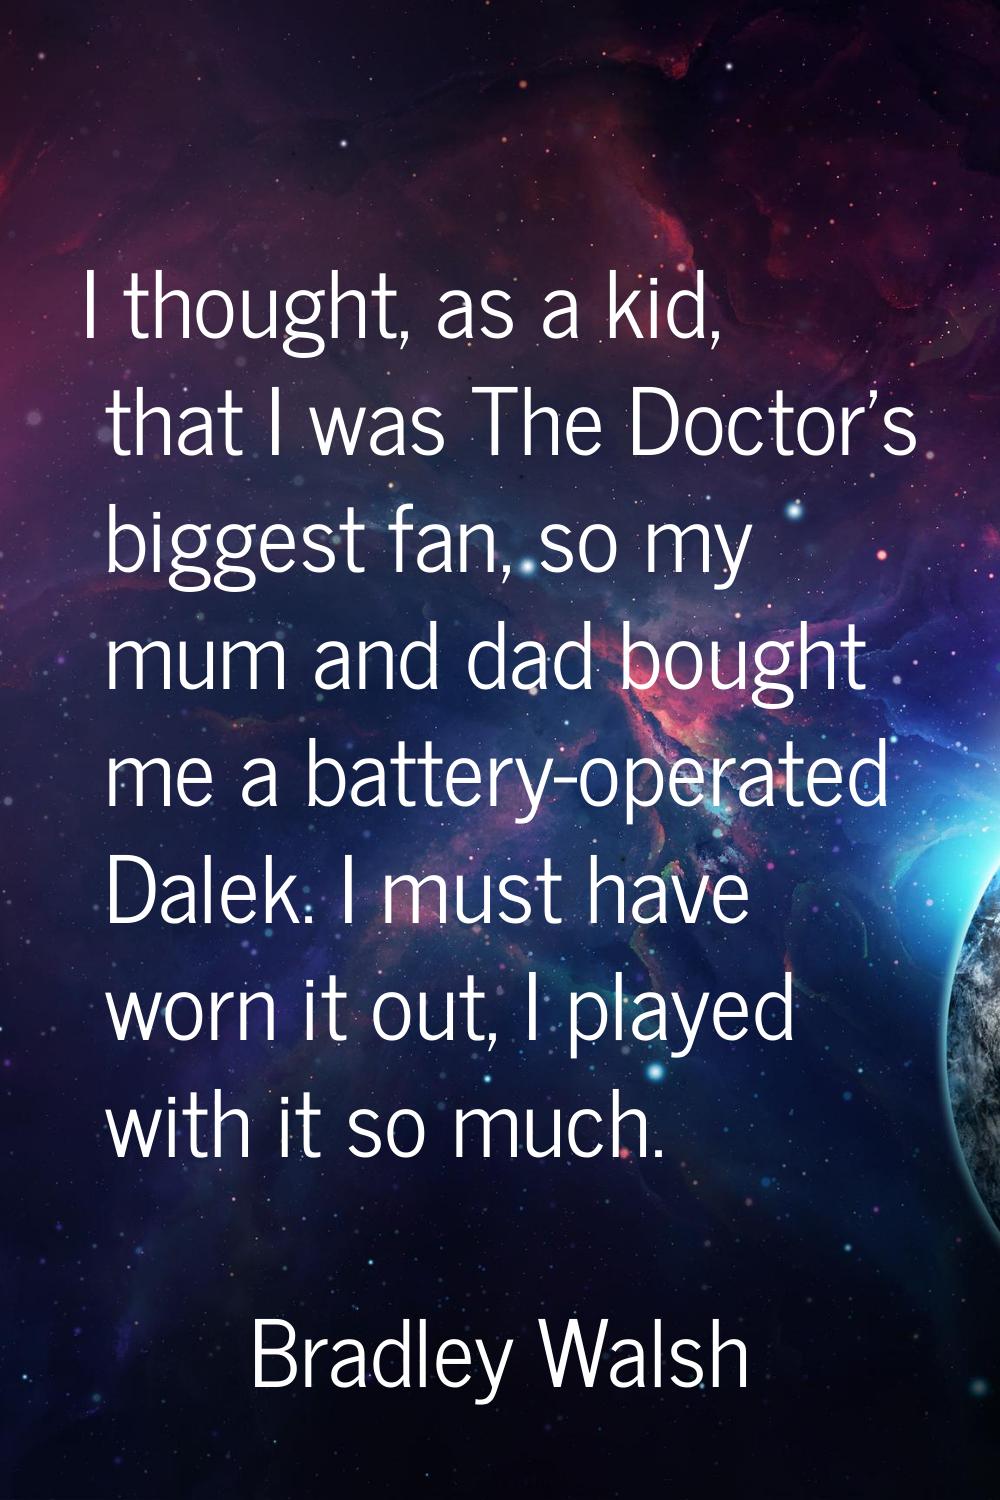 I thought, as a kid, that I was The Doctor's biggest fan, so my mum and dad bought me a battery-ope